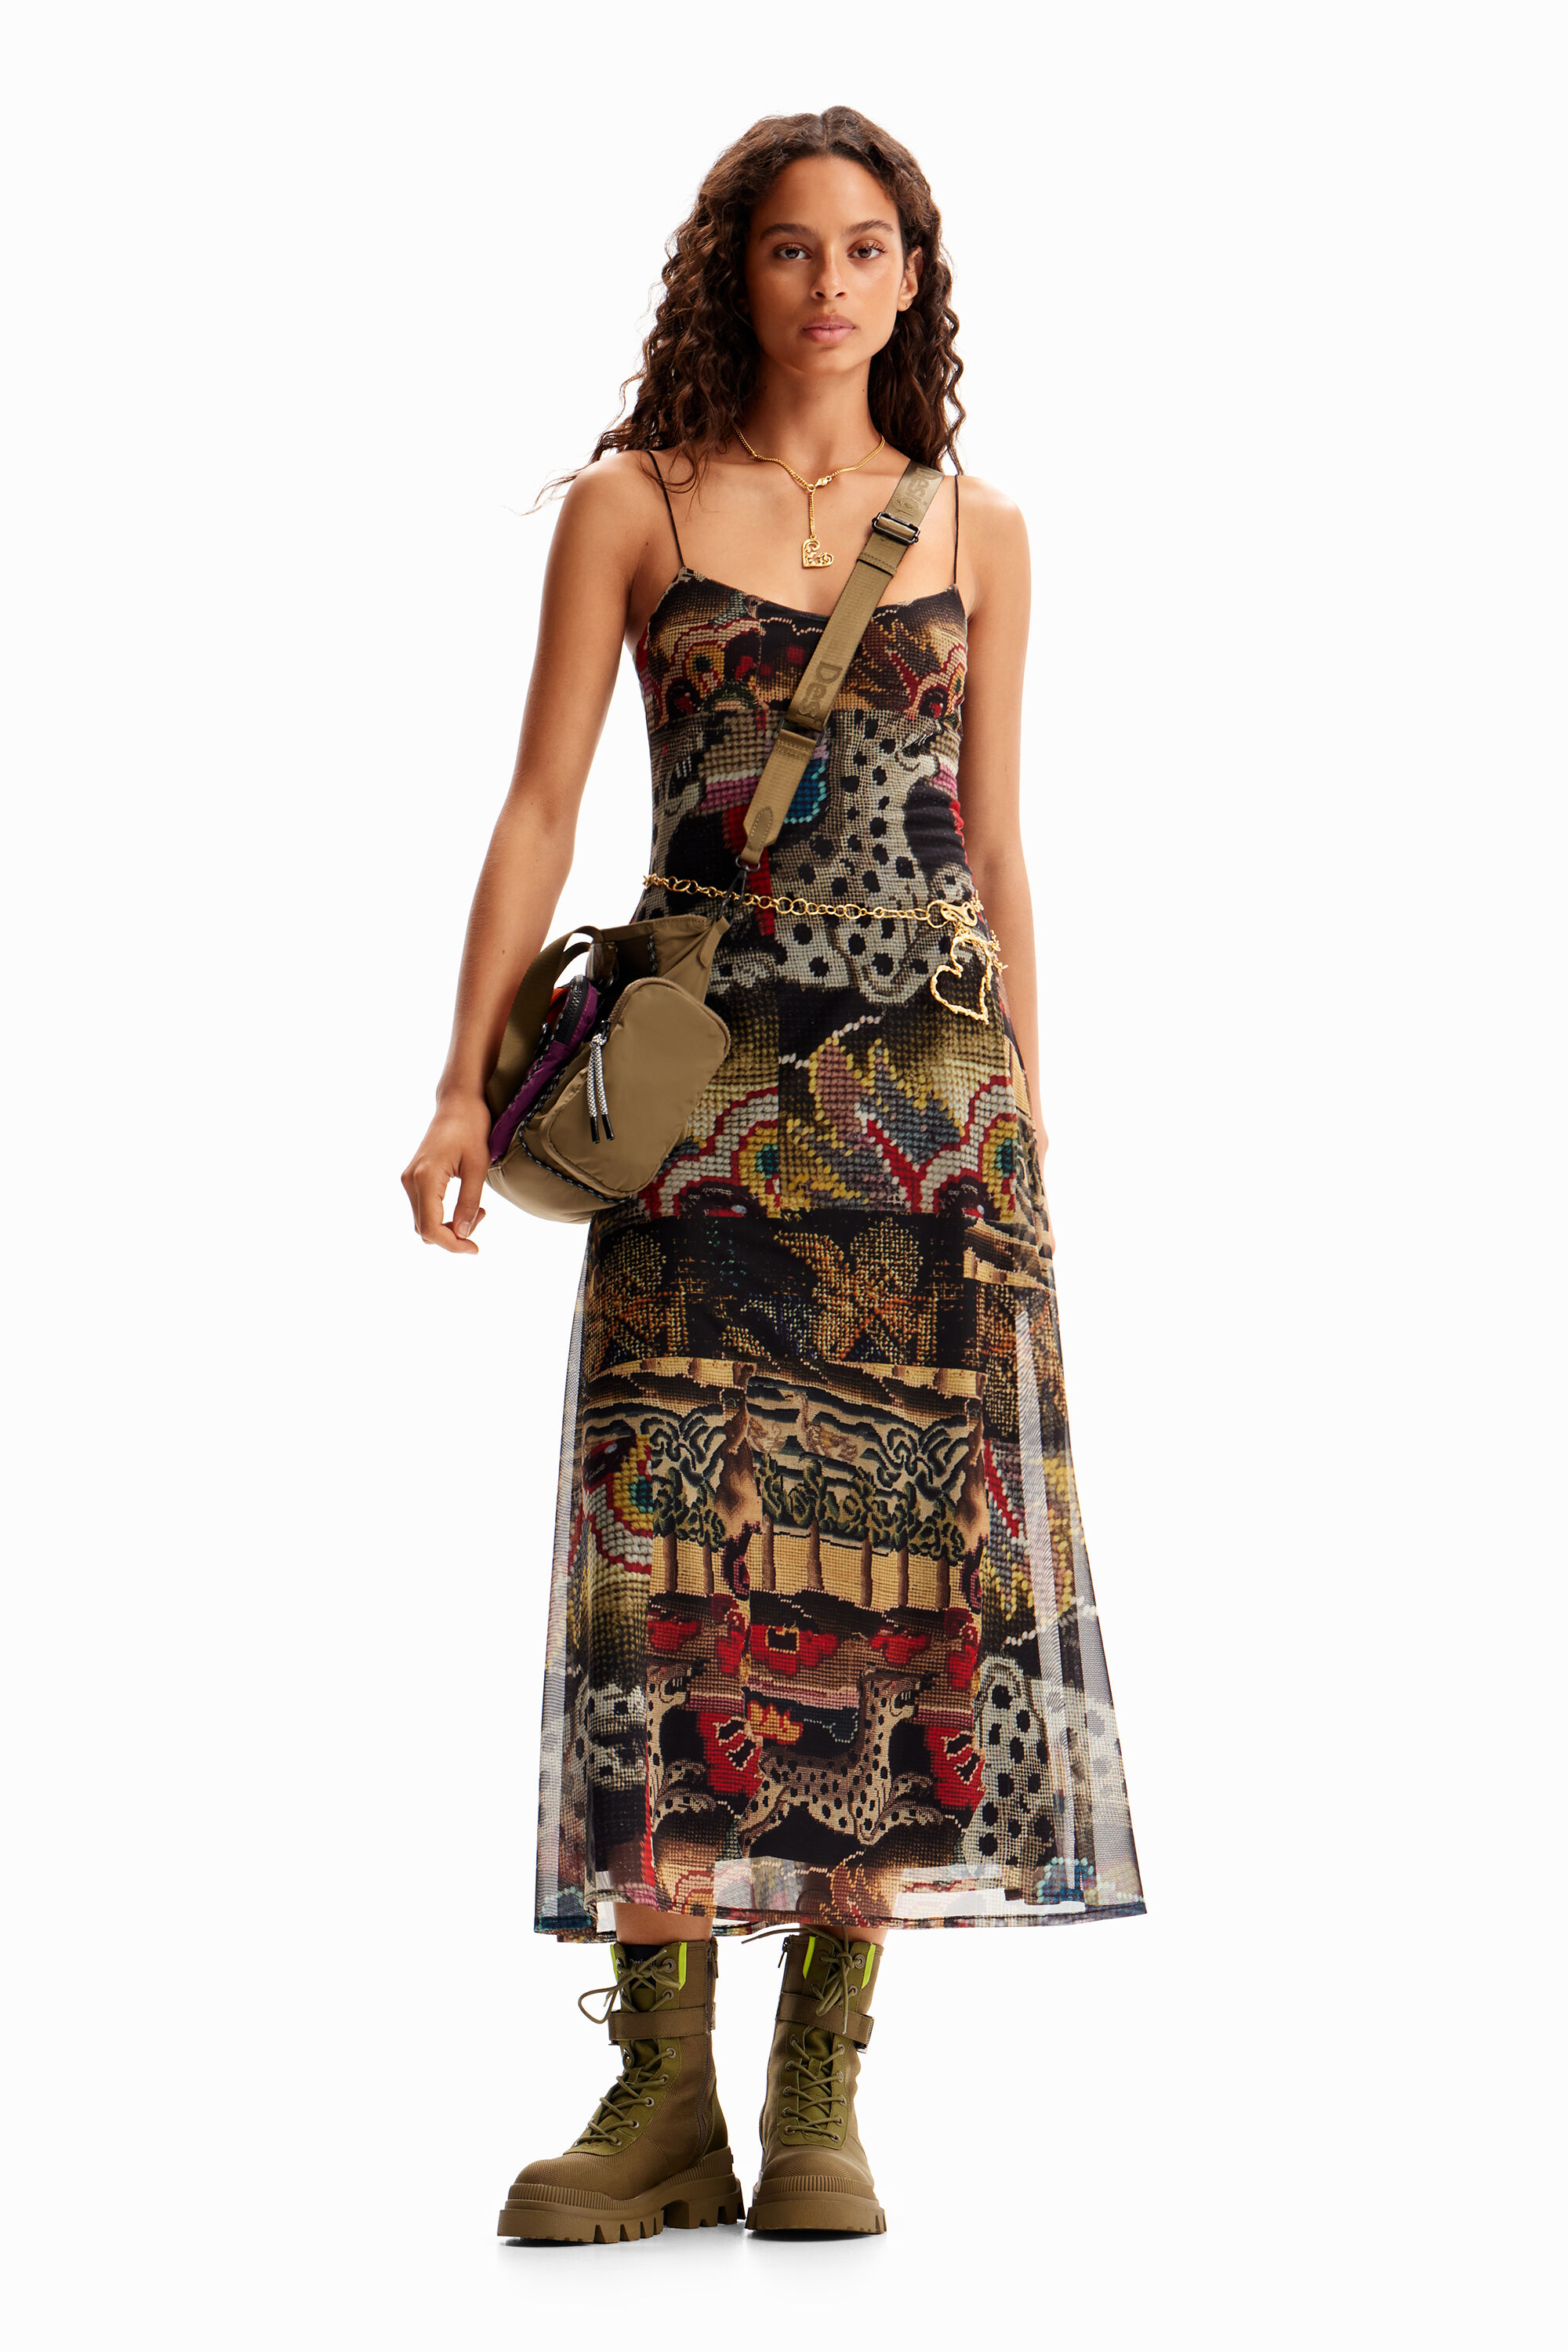 New Desigual strappy Tapestry dress by Christian Lacroix for Fall 2023 now at Angel of Vancouver Canada